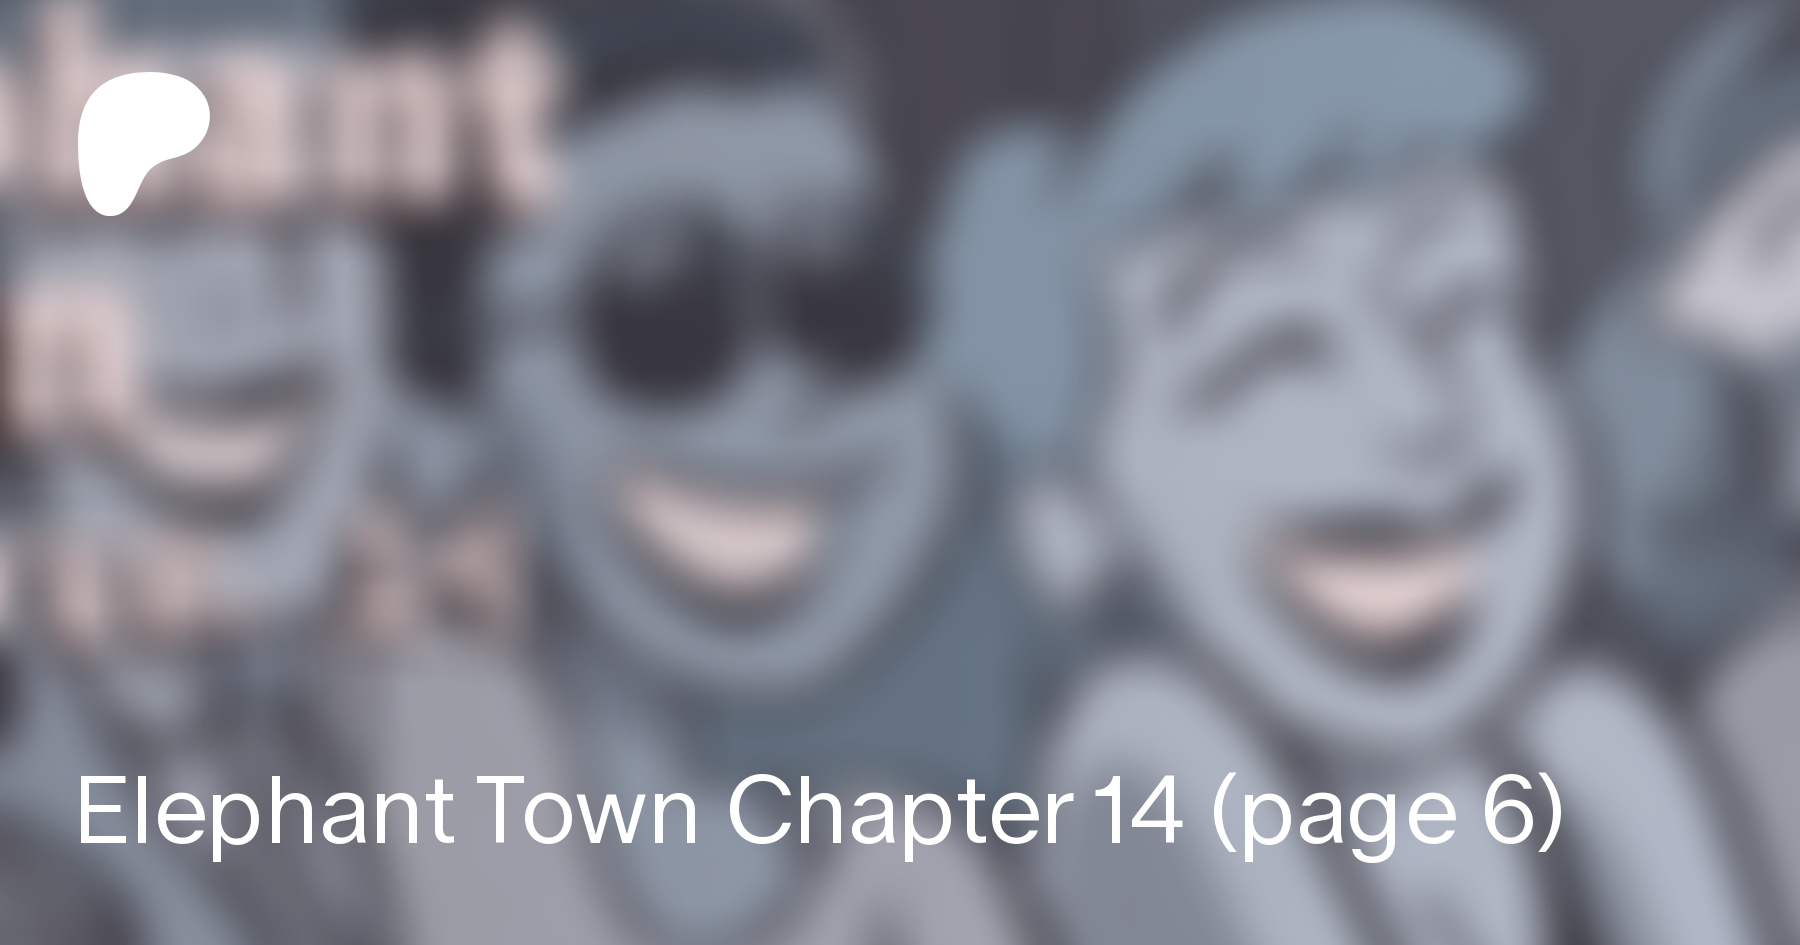 Elephant Town Chapter 14 (page 6) | Danielle Corsetto on Patreon